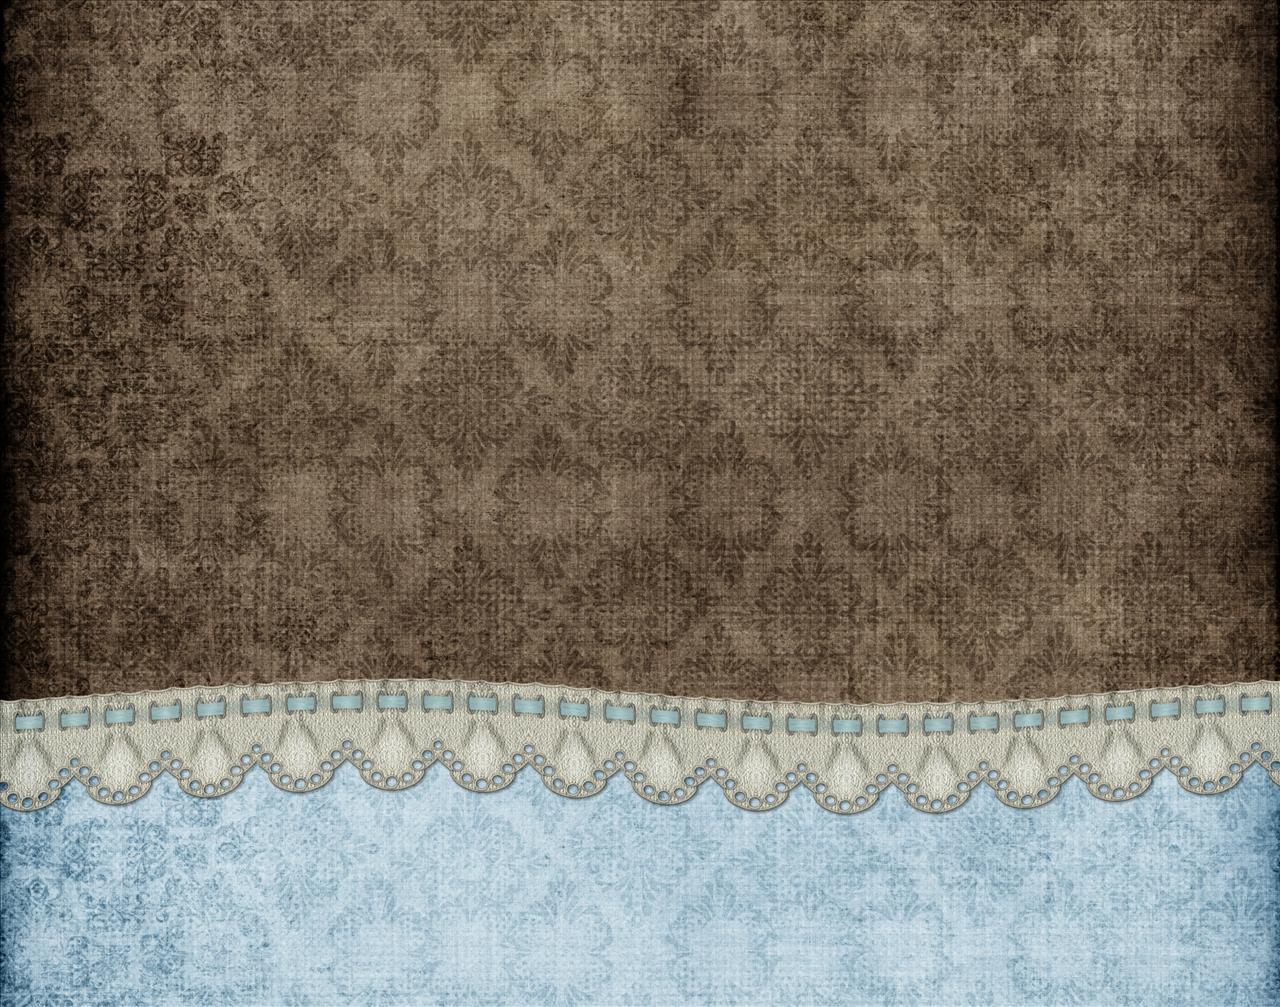 Sweet Lacy Borders Backgrounds